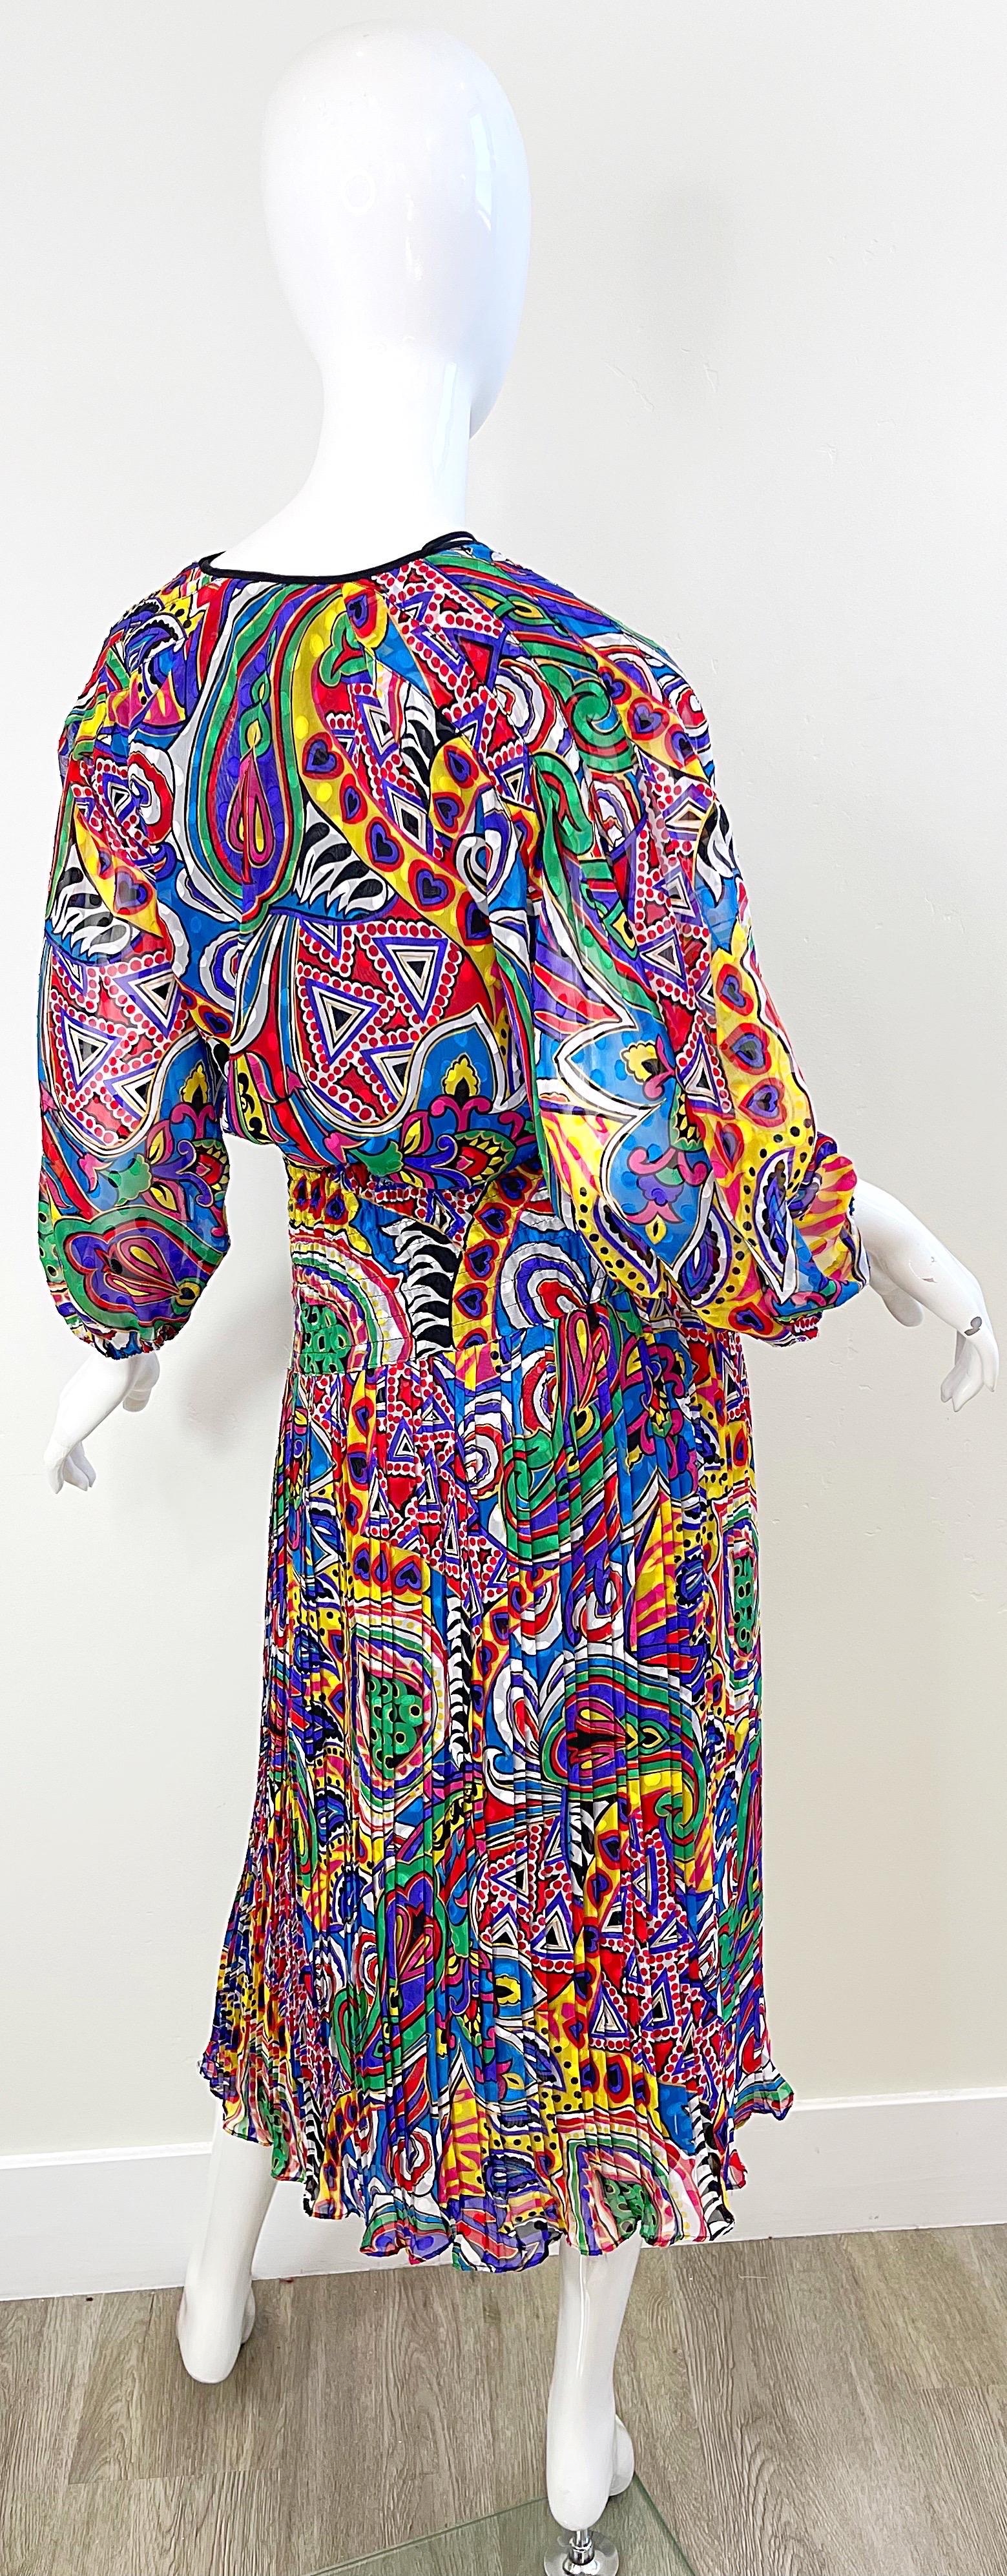 Diane Freis 1980s Novelty Heart Paisley Psychedelic Print Vintage 80s Dress For Sale 6